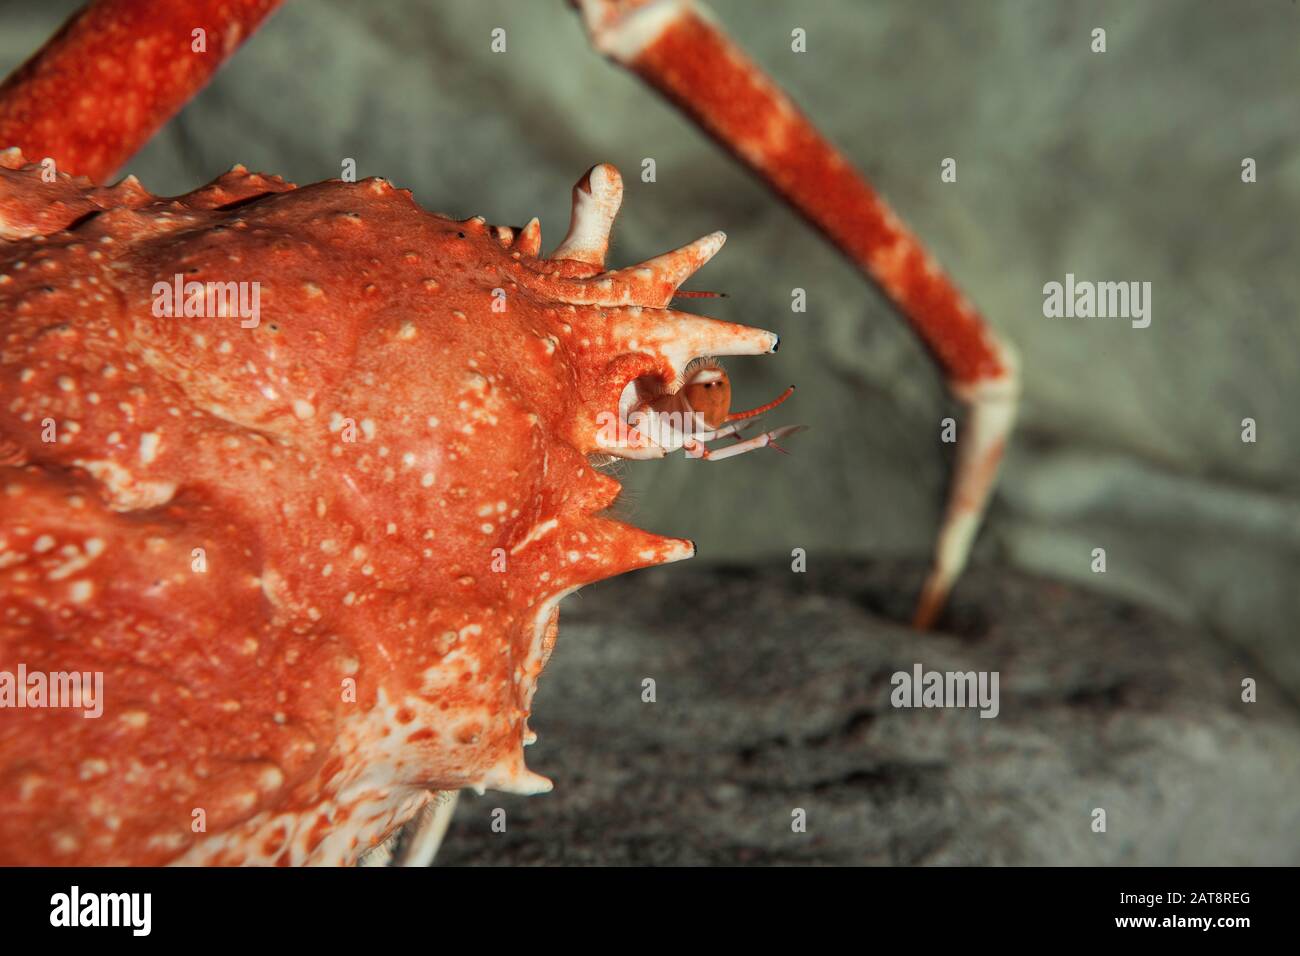 Japanese Spider Crab or Giant Spider Crab, macrocheira kaempferi, Adult, Close-up of Head with Eyes Stock Photo